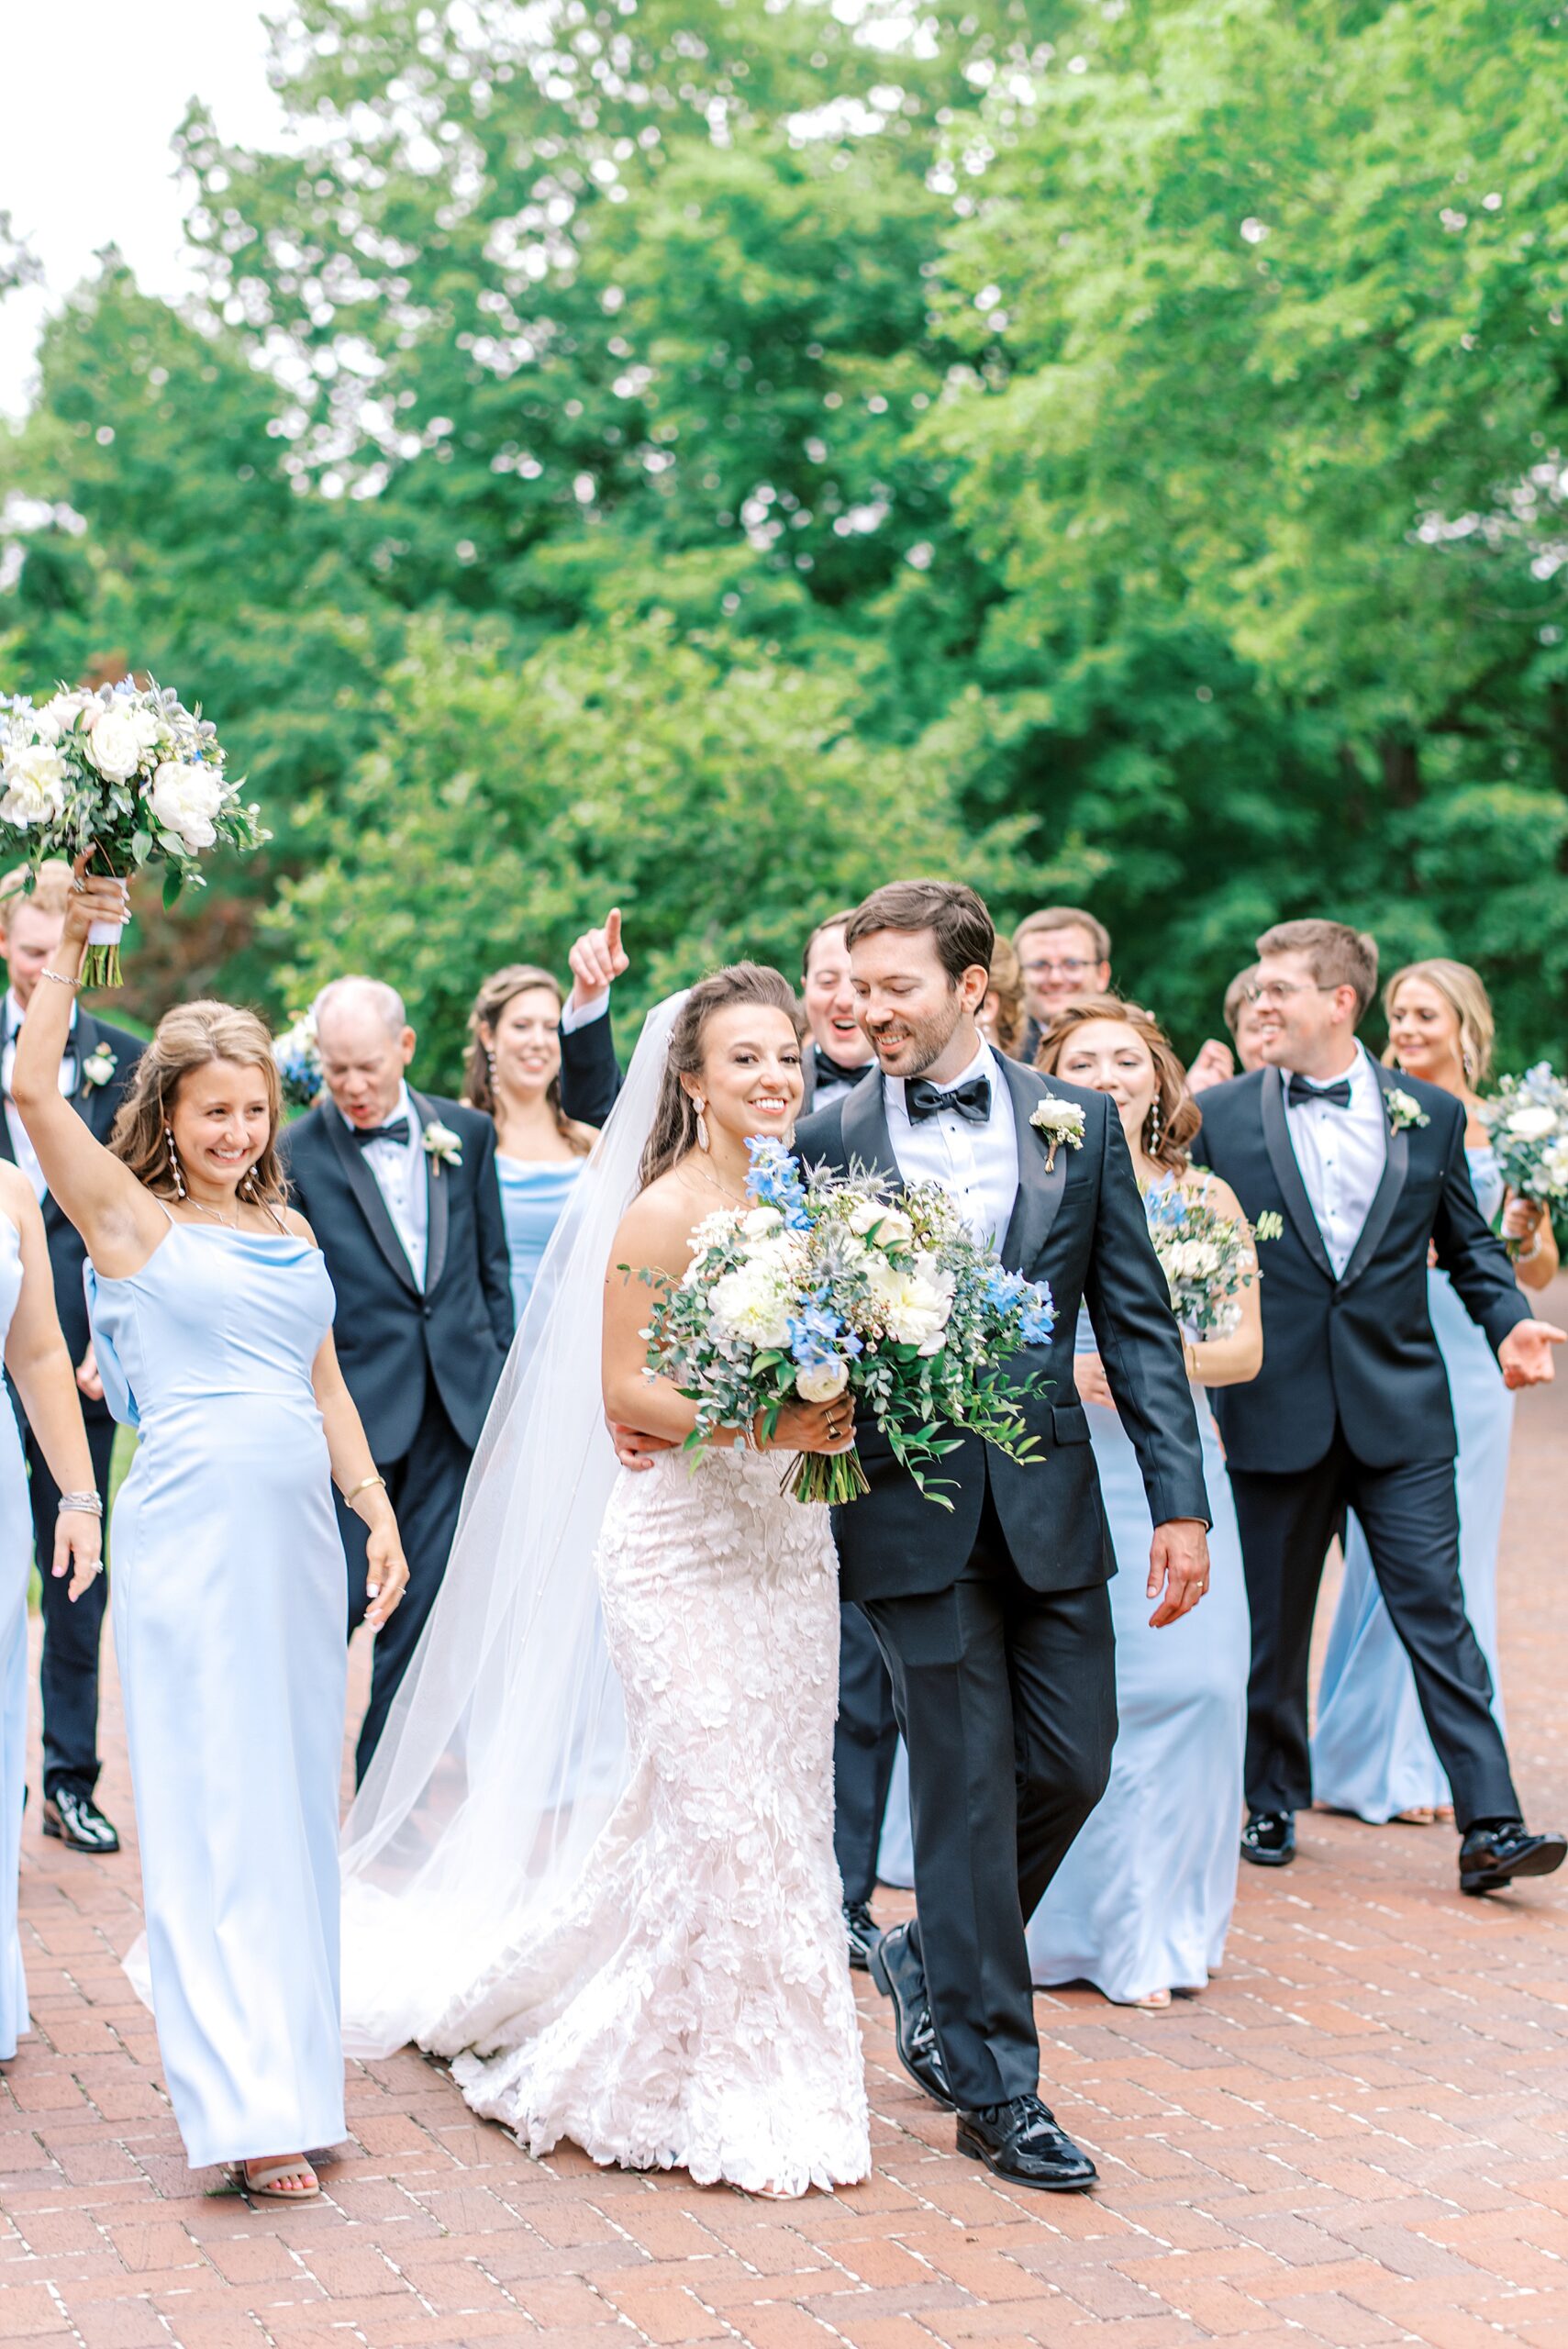 Newlyweds lead their wedding party while walking down a brick path